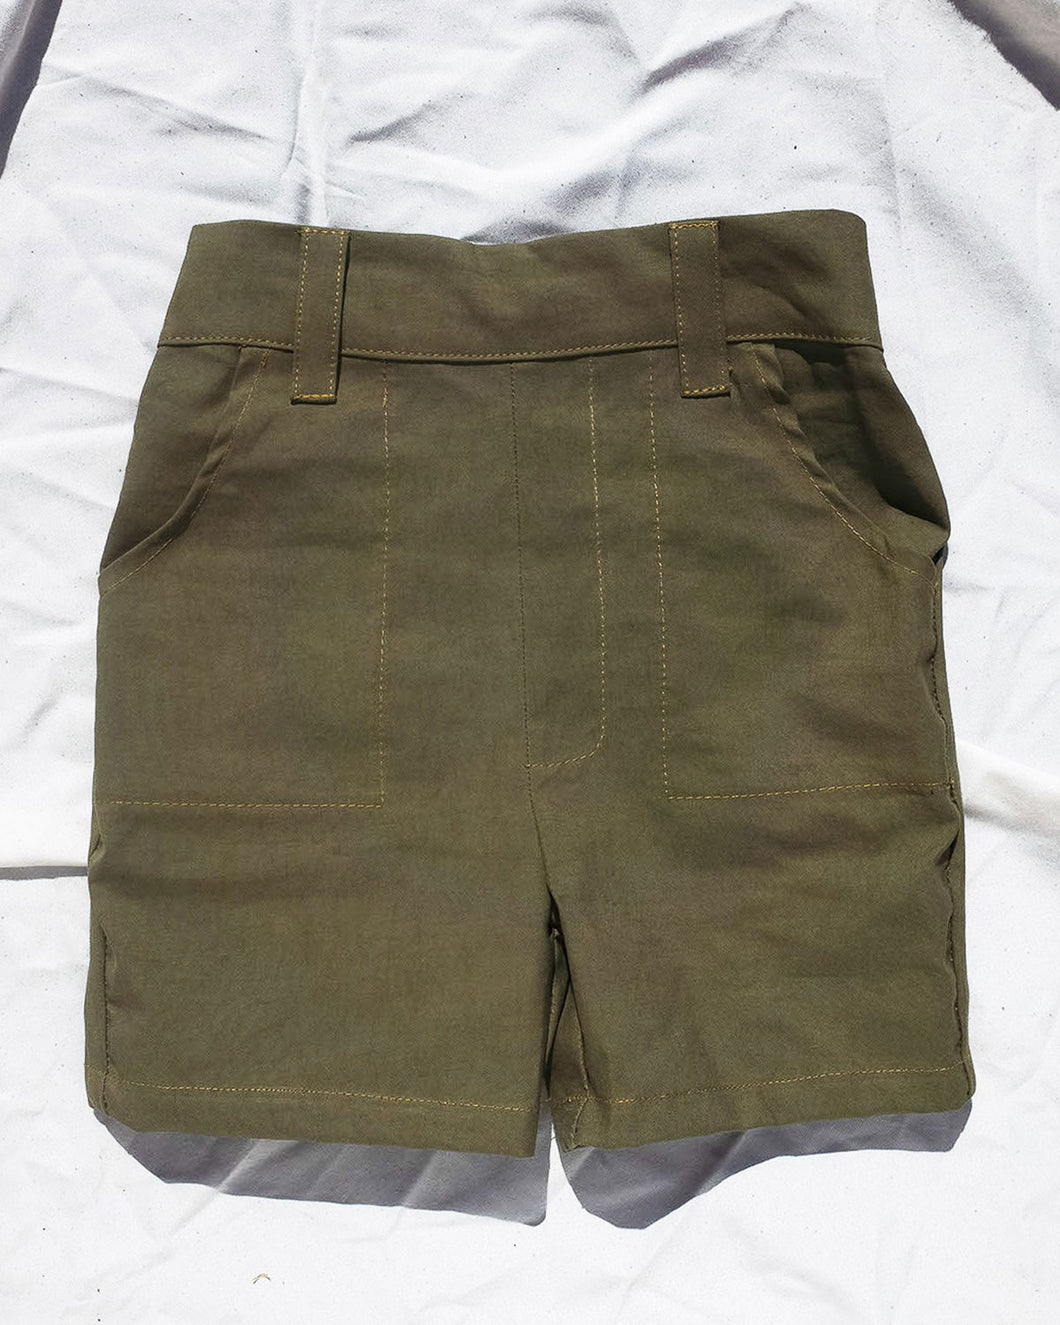 Olive green Short for toddlers and kids/ High waisted and 2 pockets.